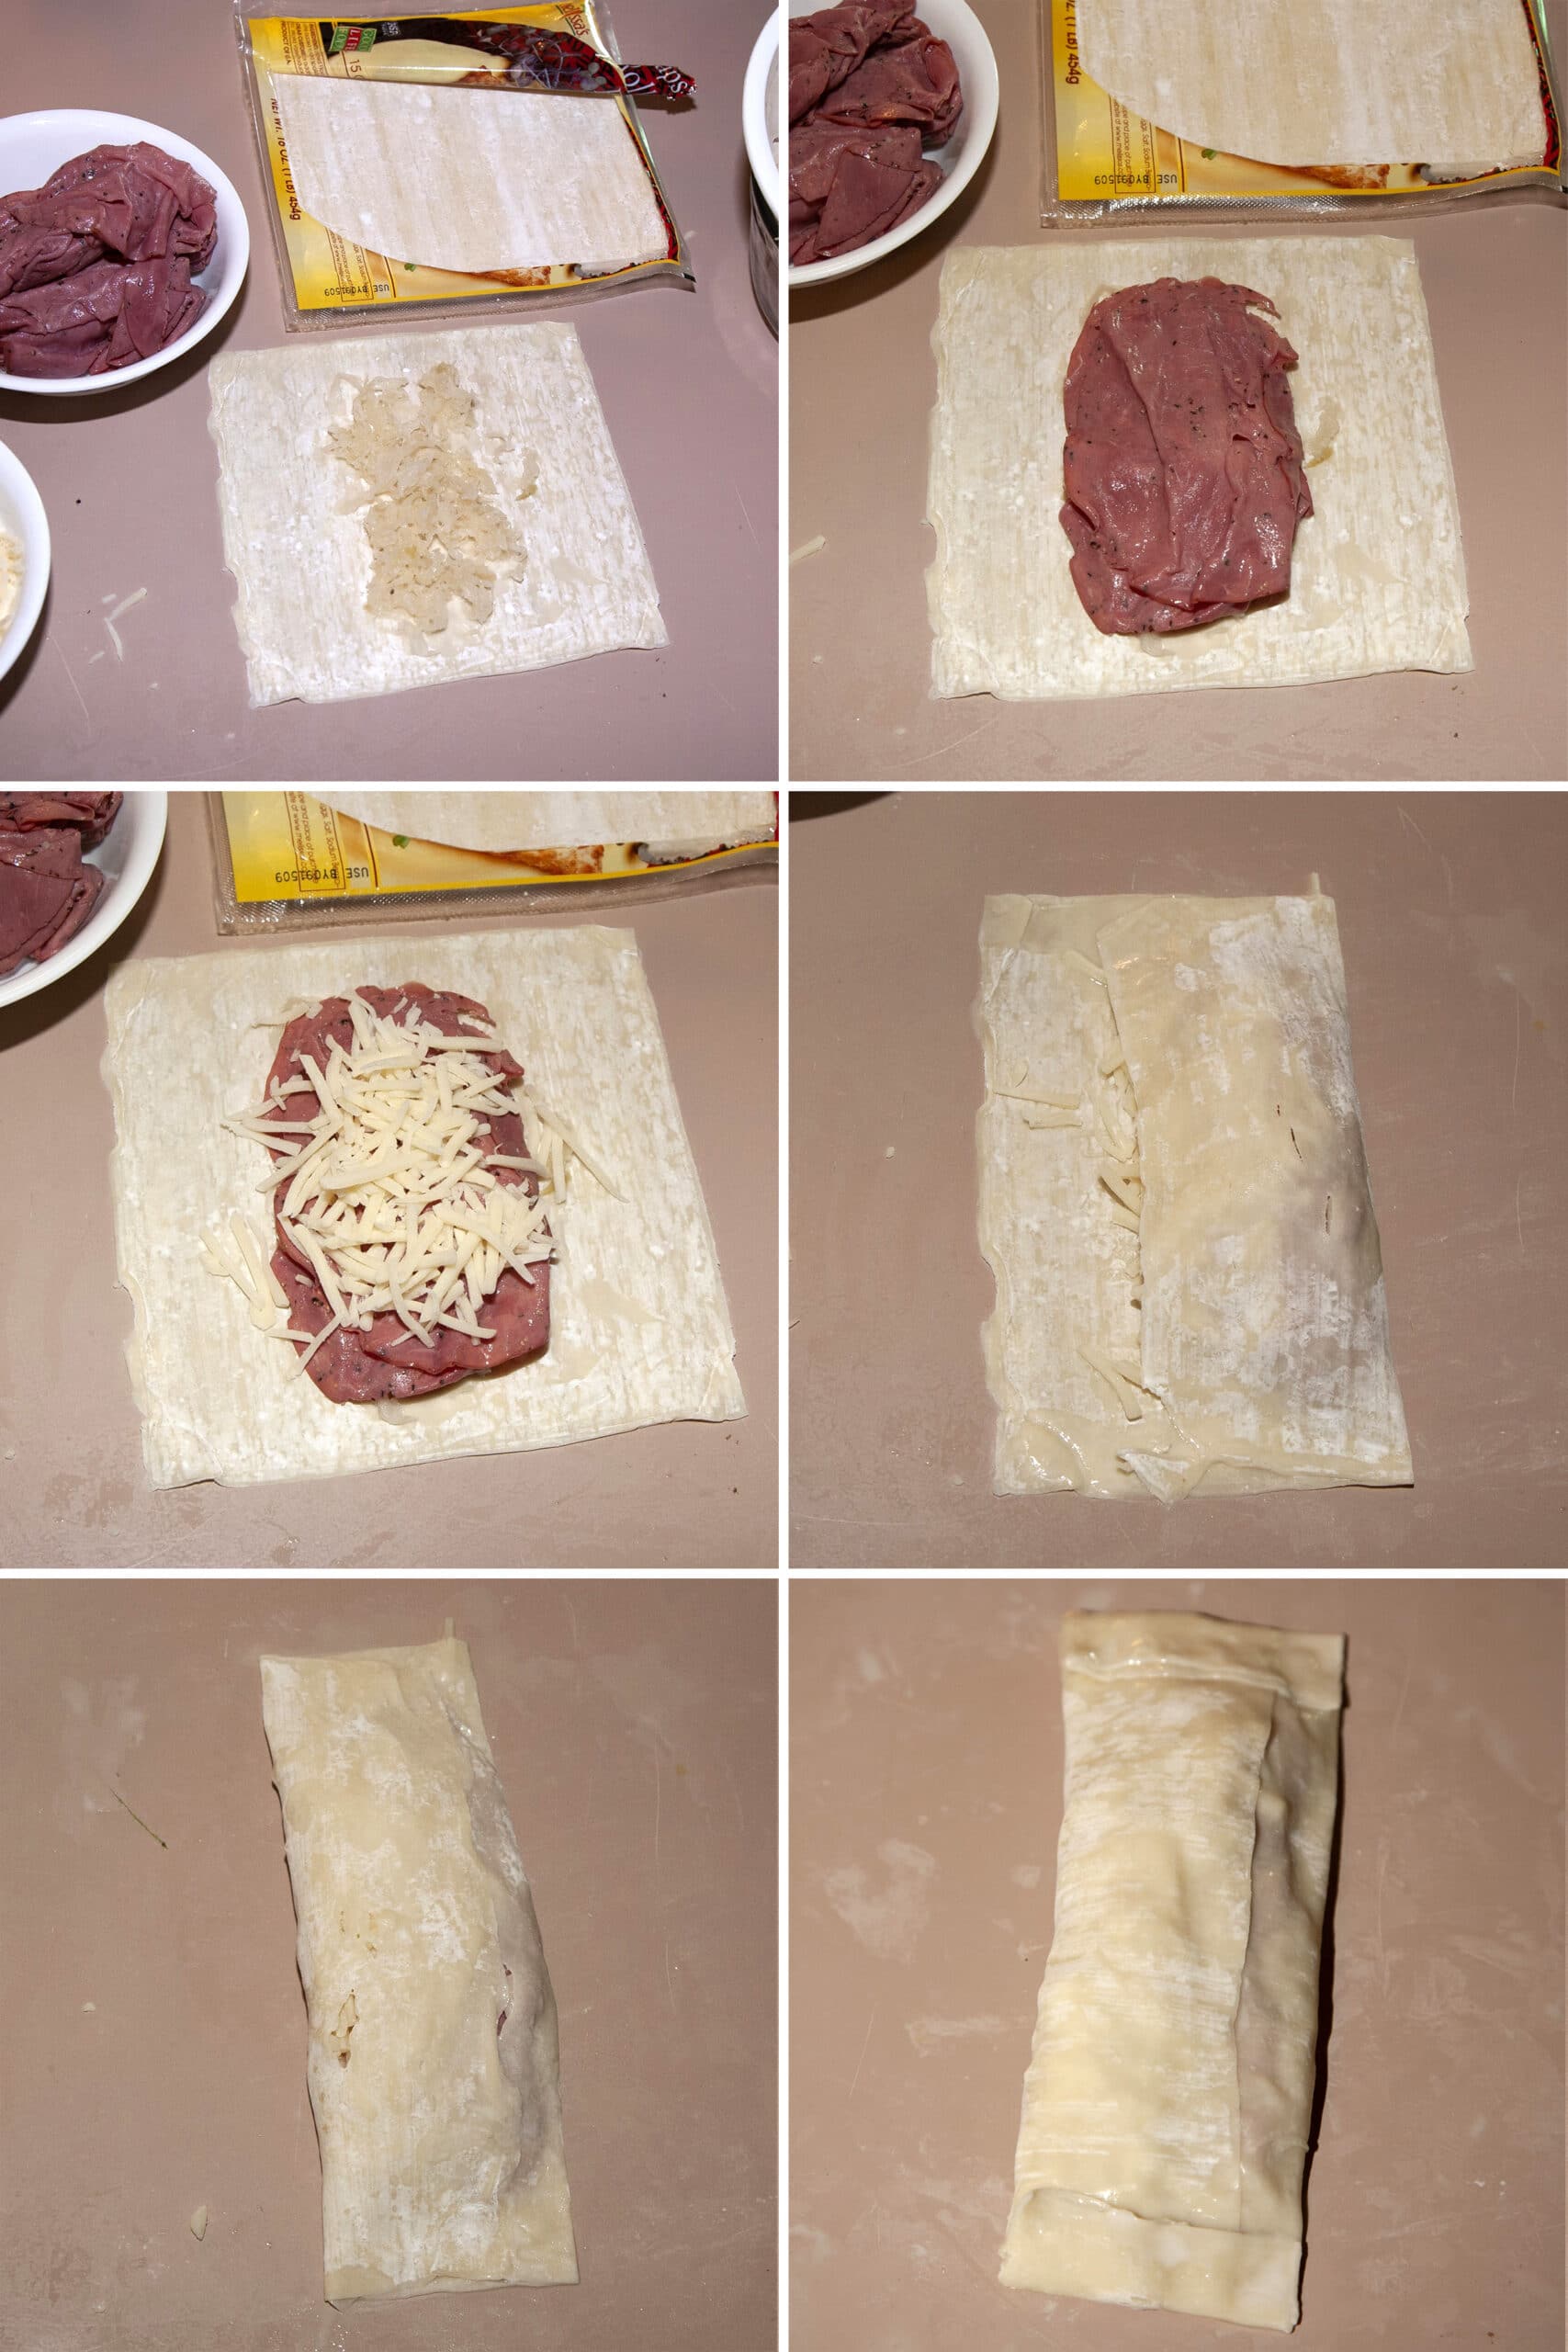 A 6 part image showing how to assemble the reuben poppers, as described in the post.